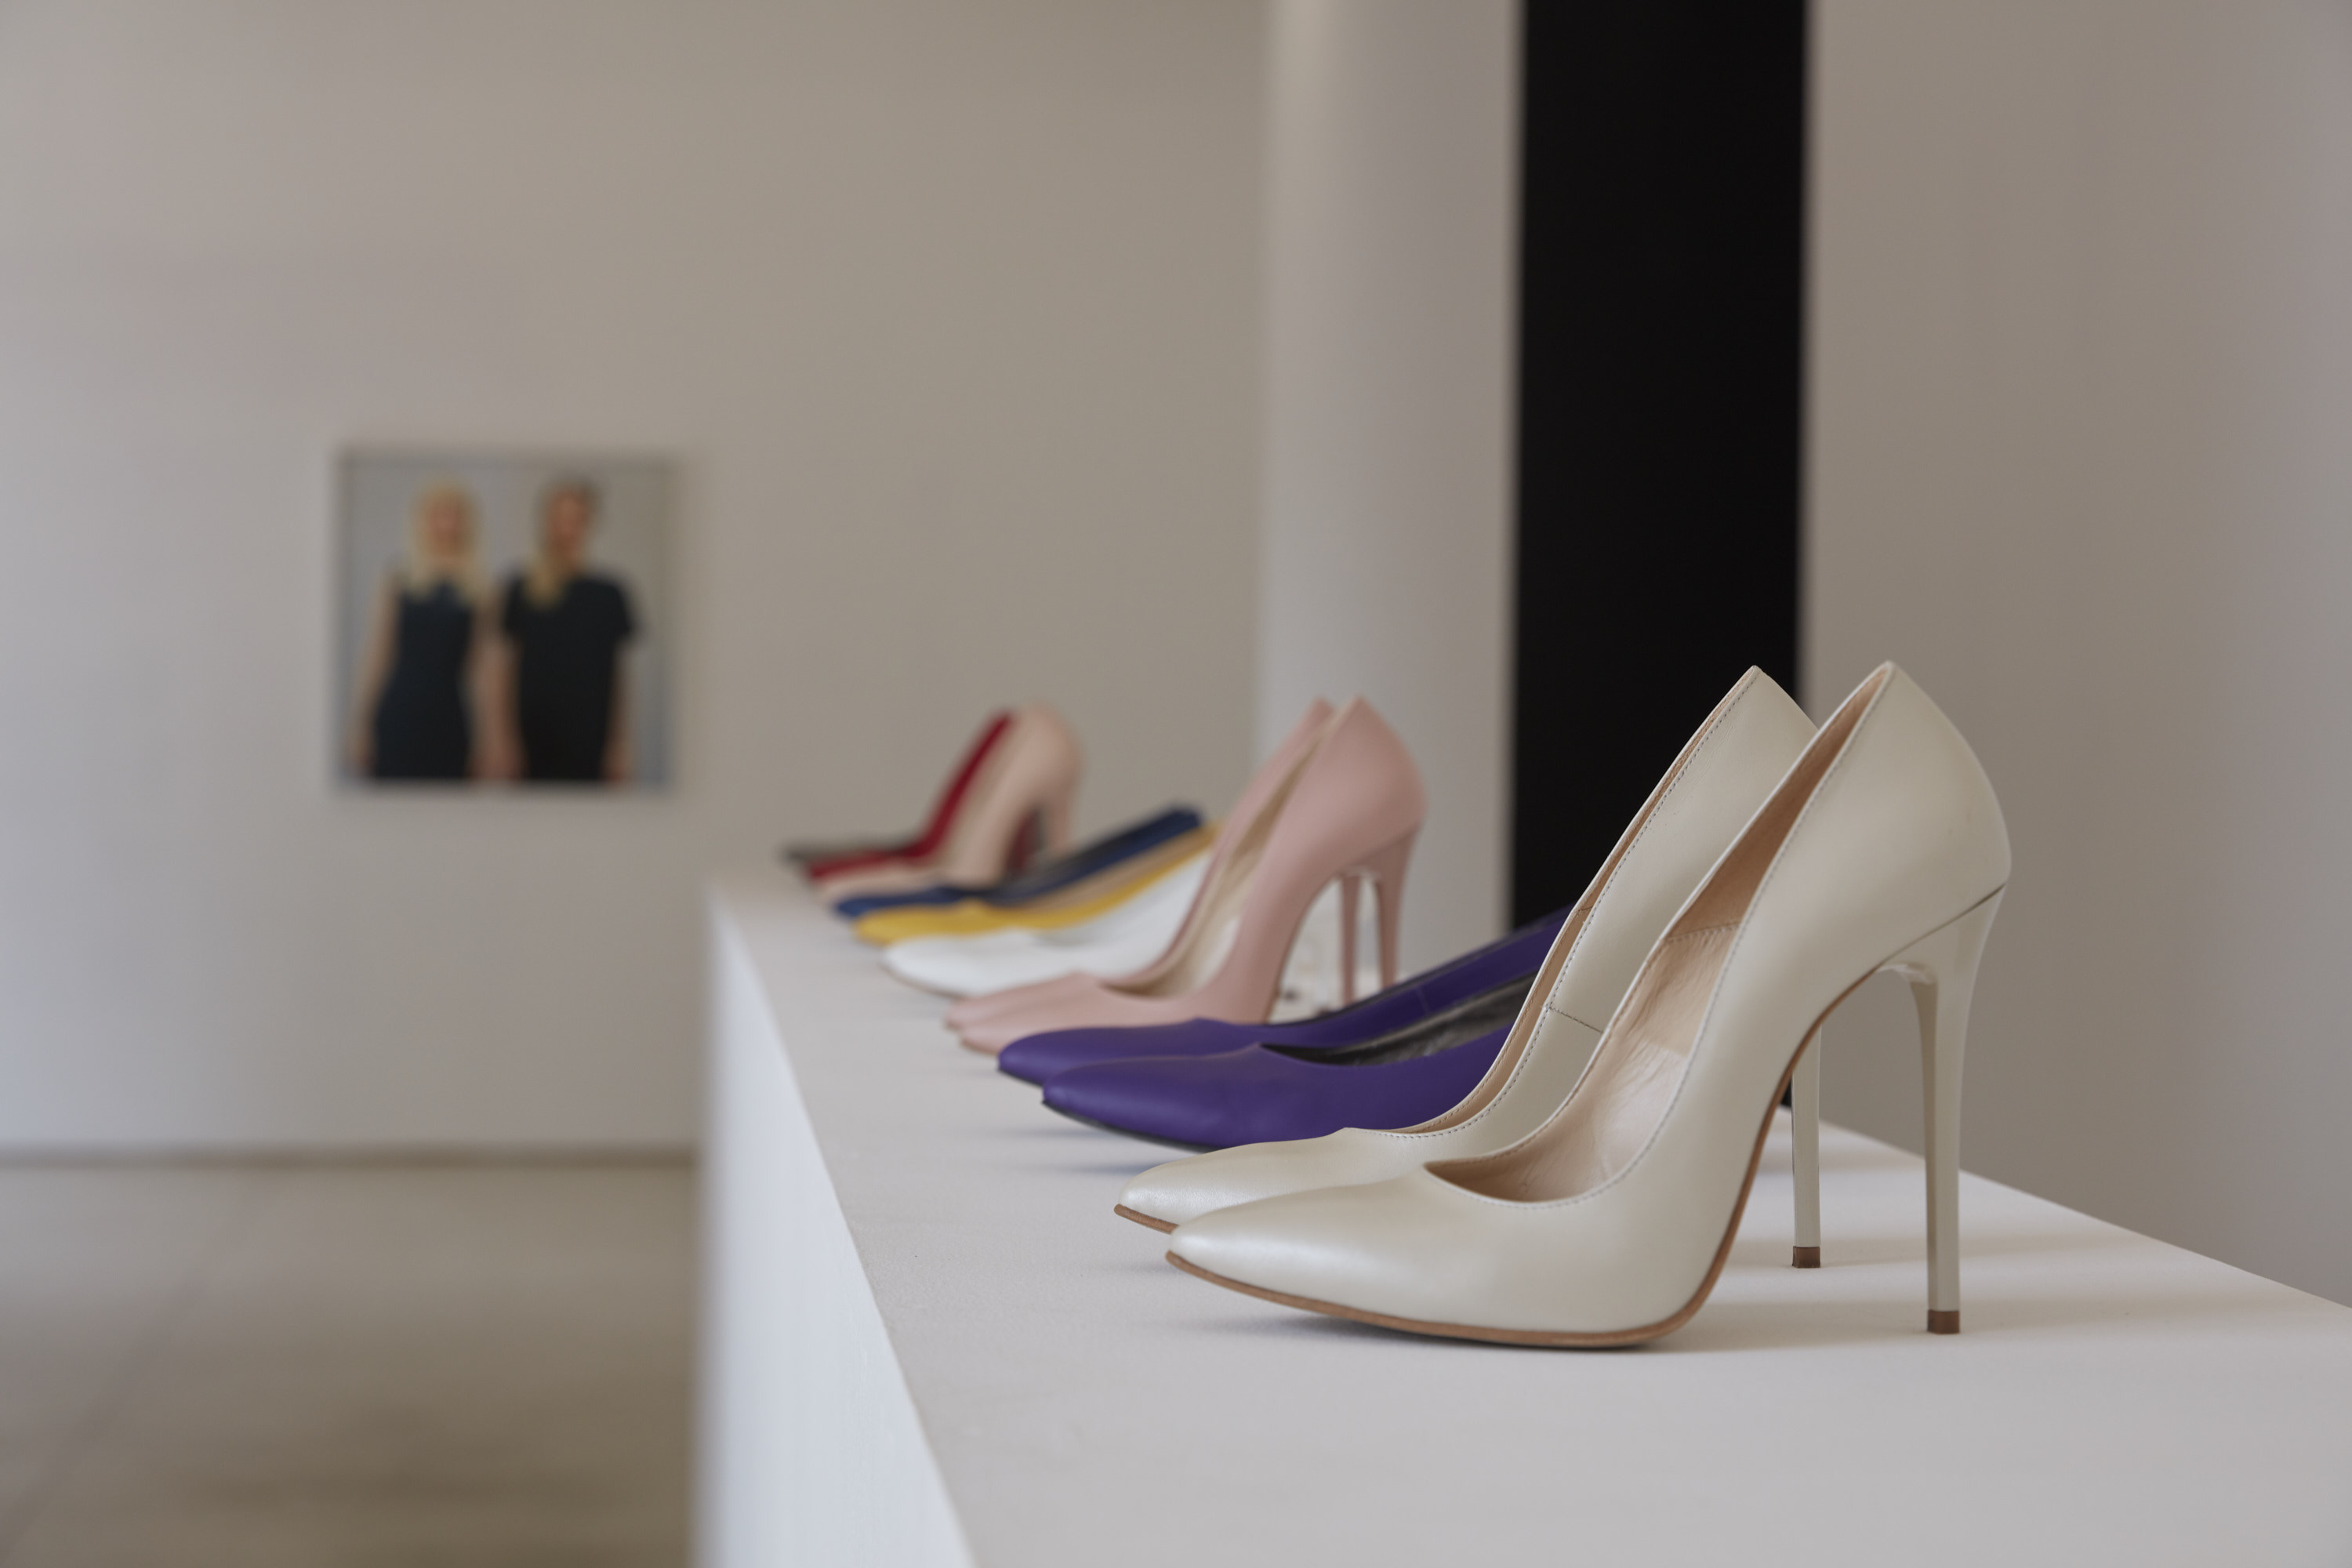 The Bureau of Melodramatic Research, High Heel Communism (installation), 2022, 9 pairs of high-heel shoes, 400 x 40 x 110 cm 